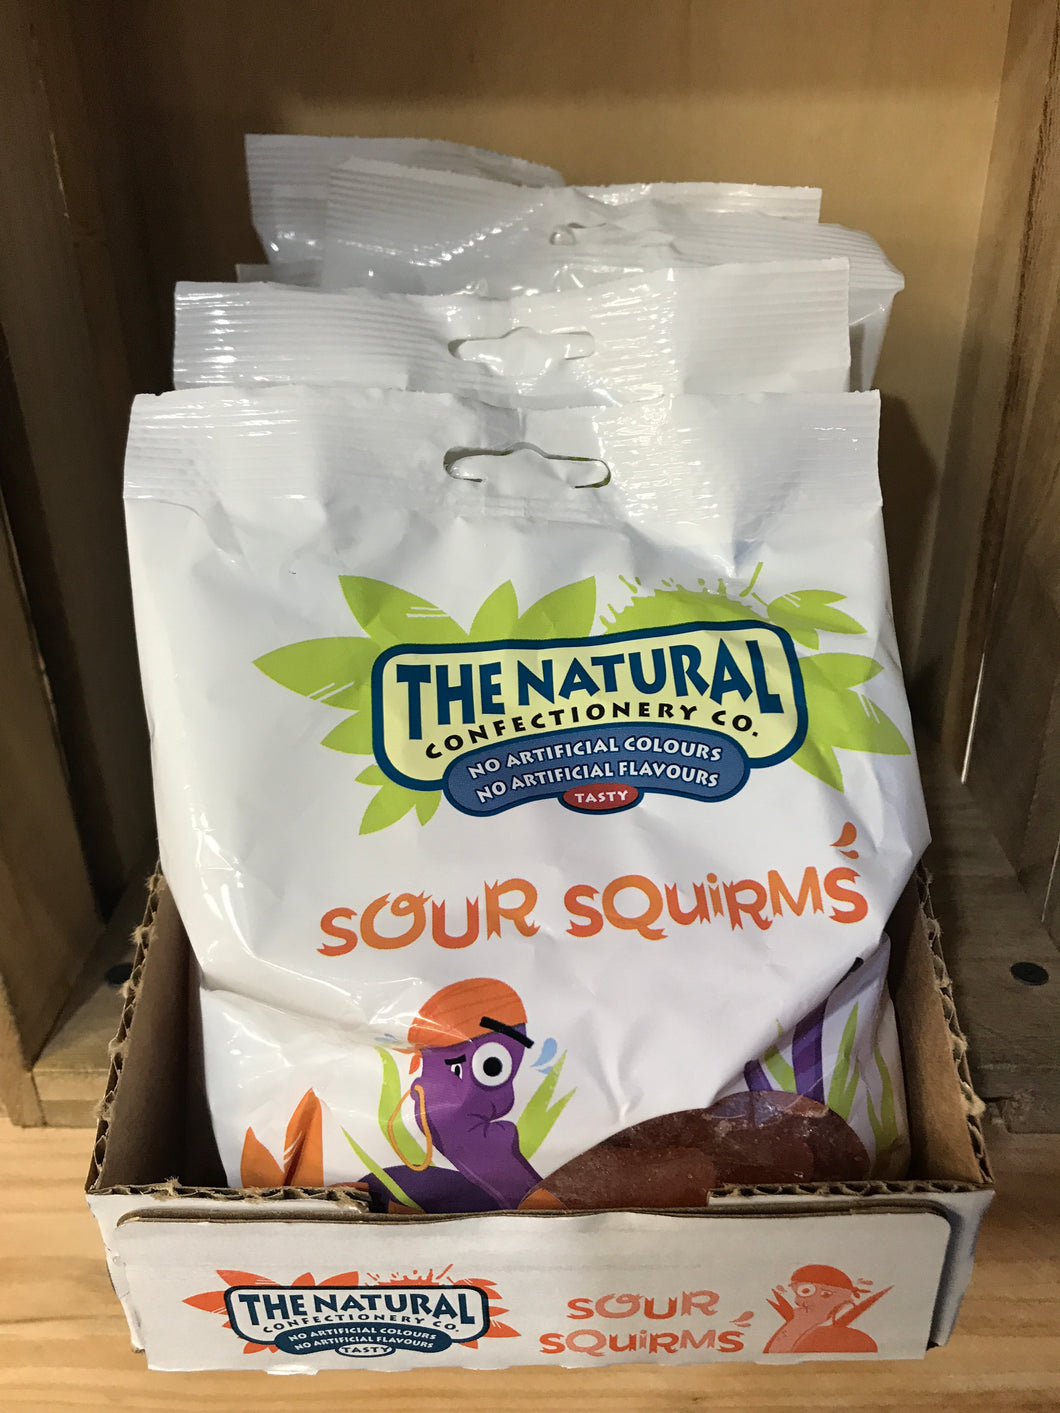 7x The Natural Confectionary Co. Sour Squirms (7x160g)